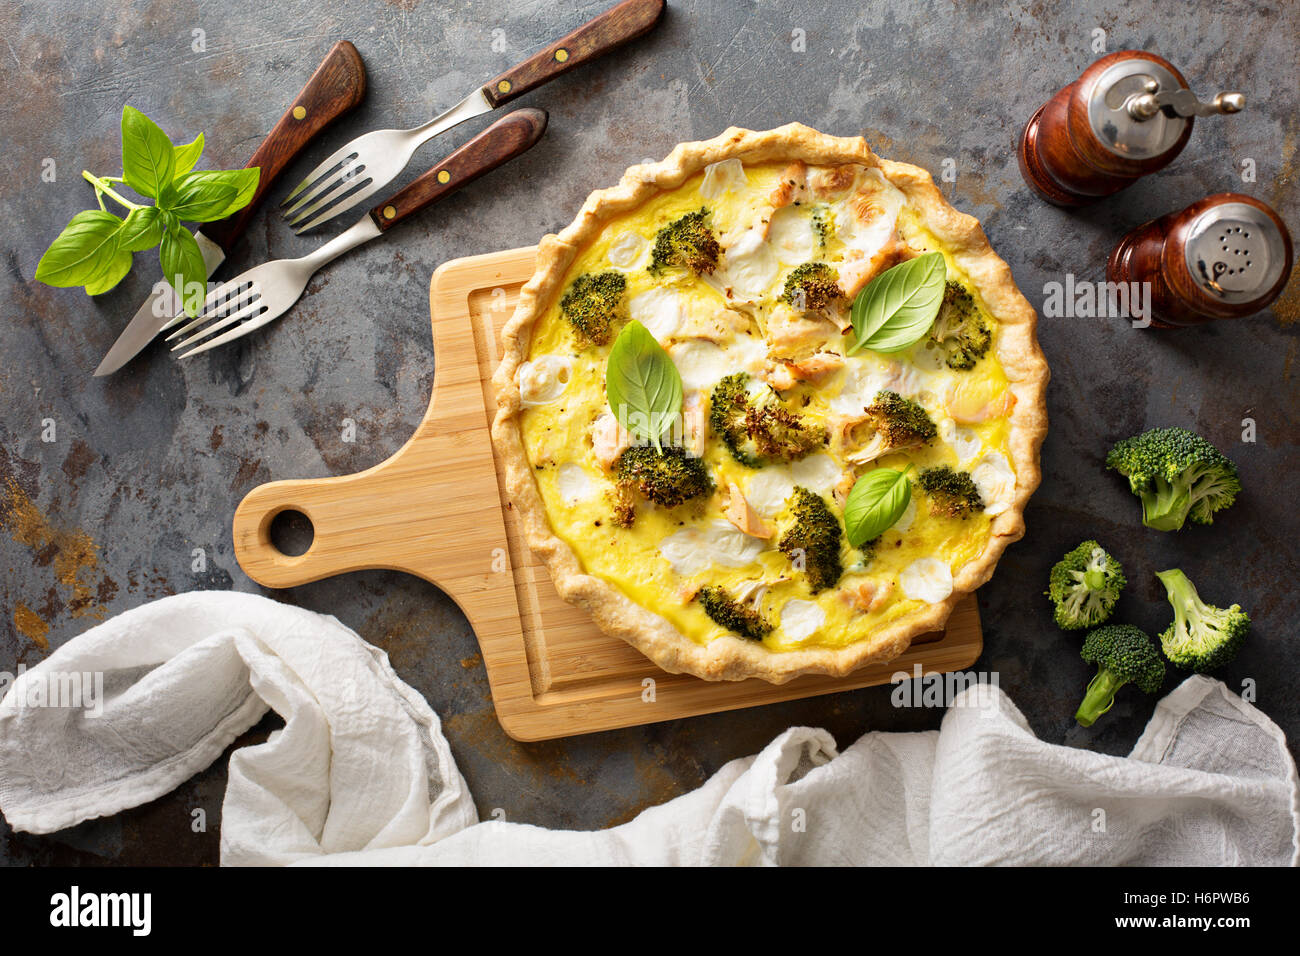 Healthy vegetable and salmon quiche Stock Photo